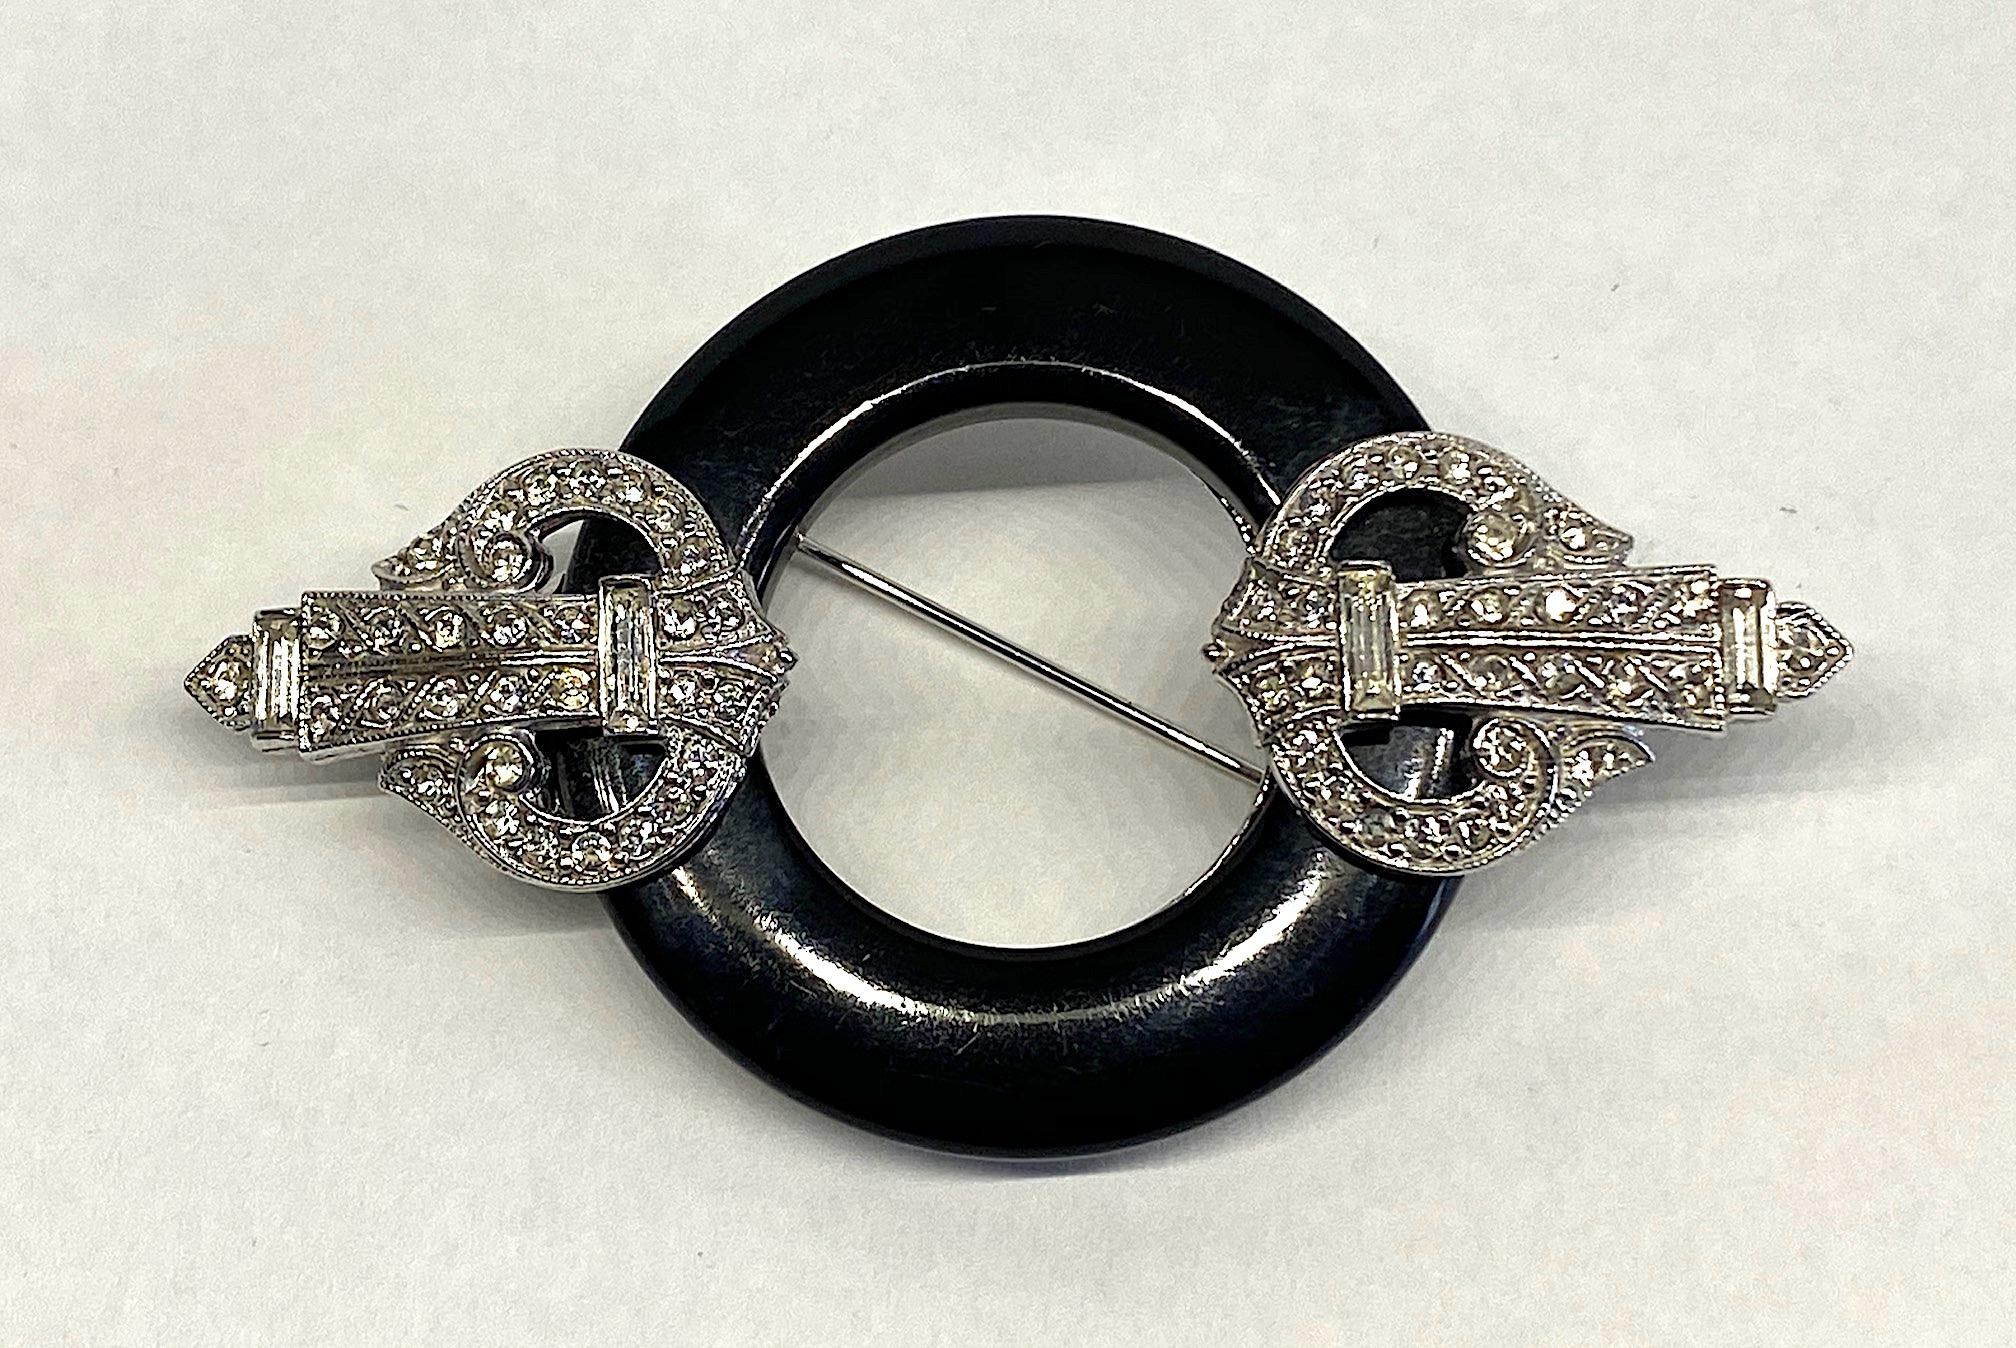 A wonderful Art Deco style brooch in rhodium plate set with rhinestones and a black resin ring by the iconic fashion jewelry company Kenneth Jay Lane. The brooch is circa 1980 when  the desire and revival for all things Art Deco became popular. The